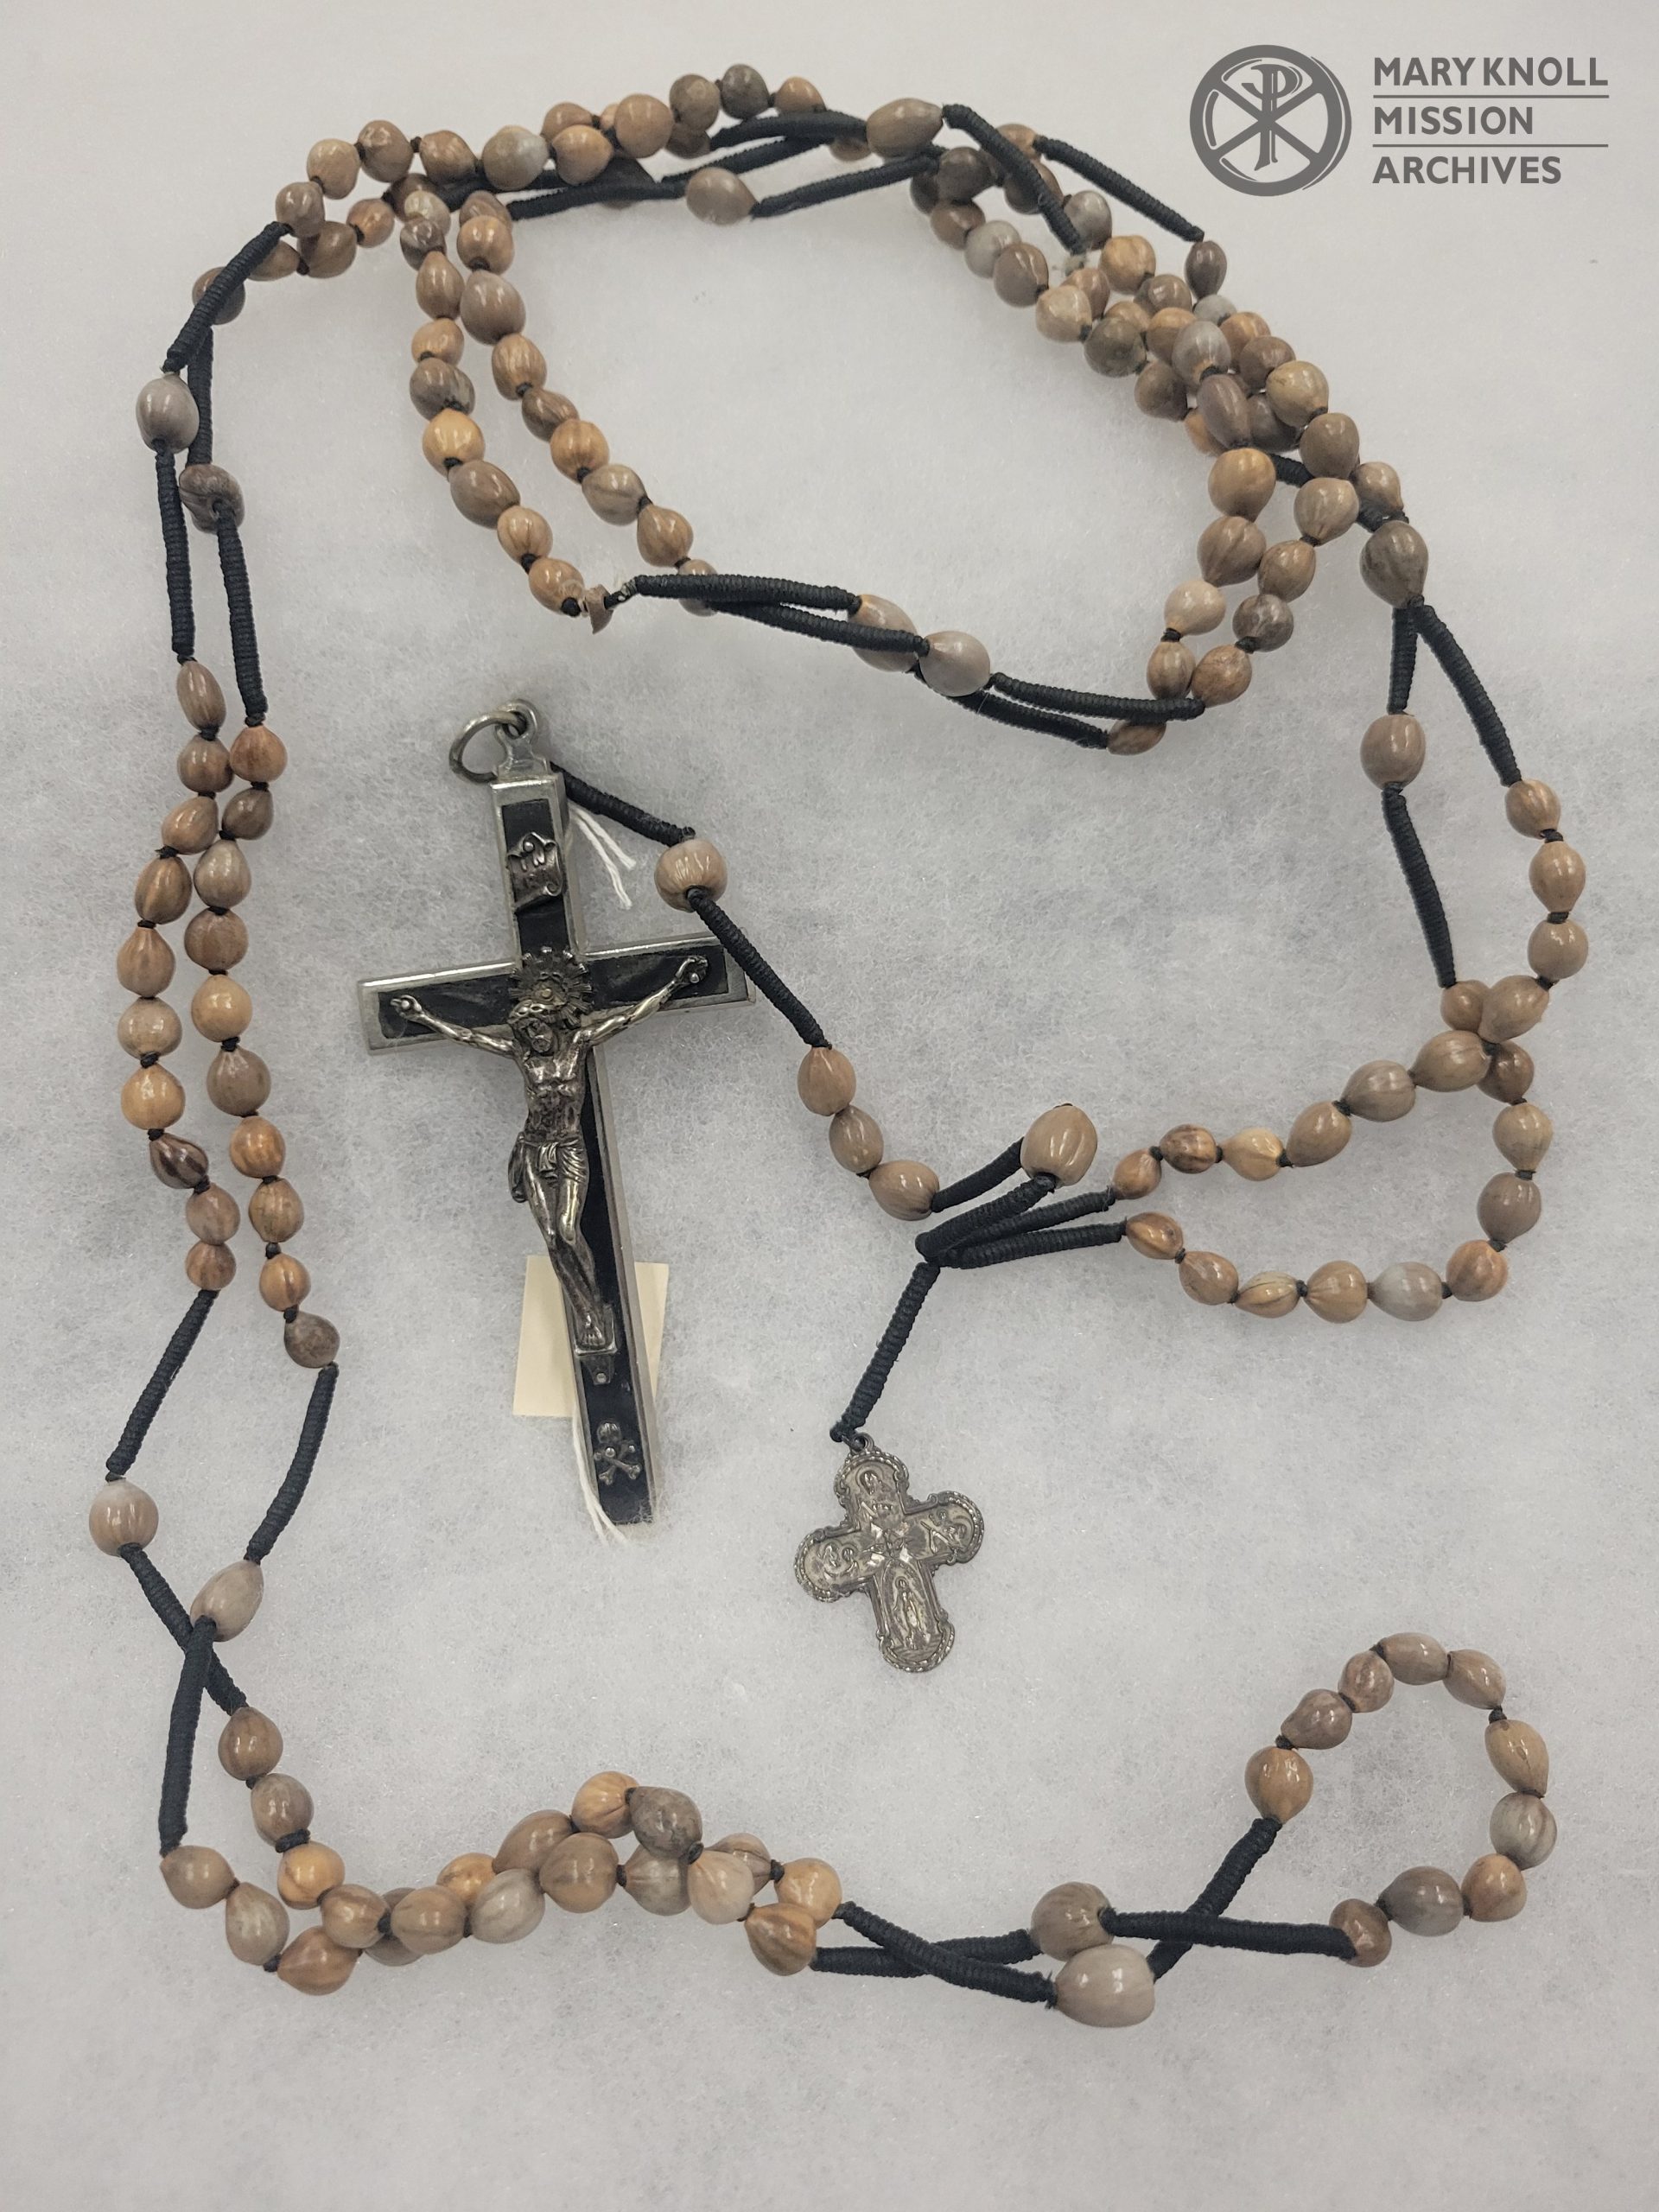 Example of a Mission Rosary